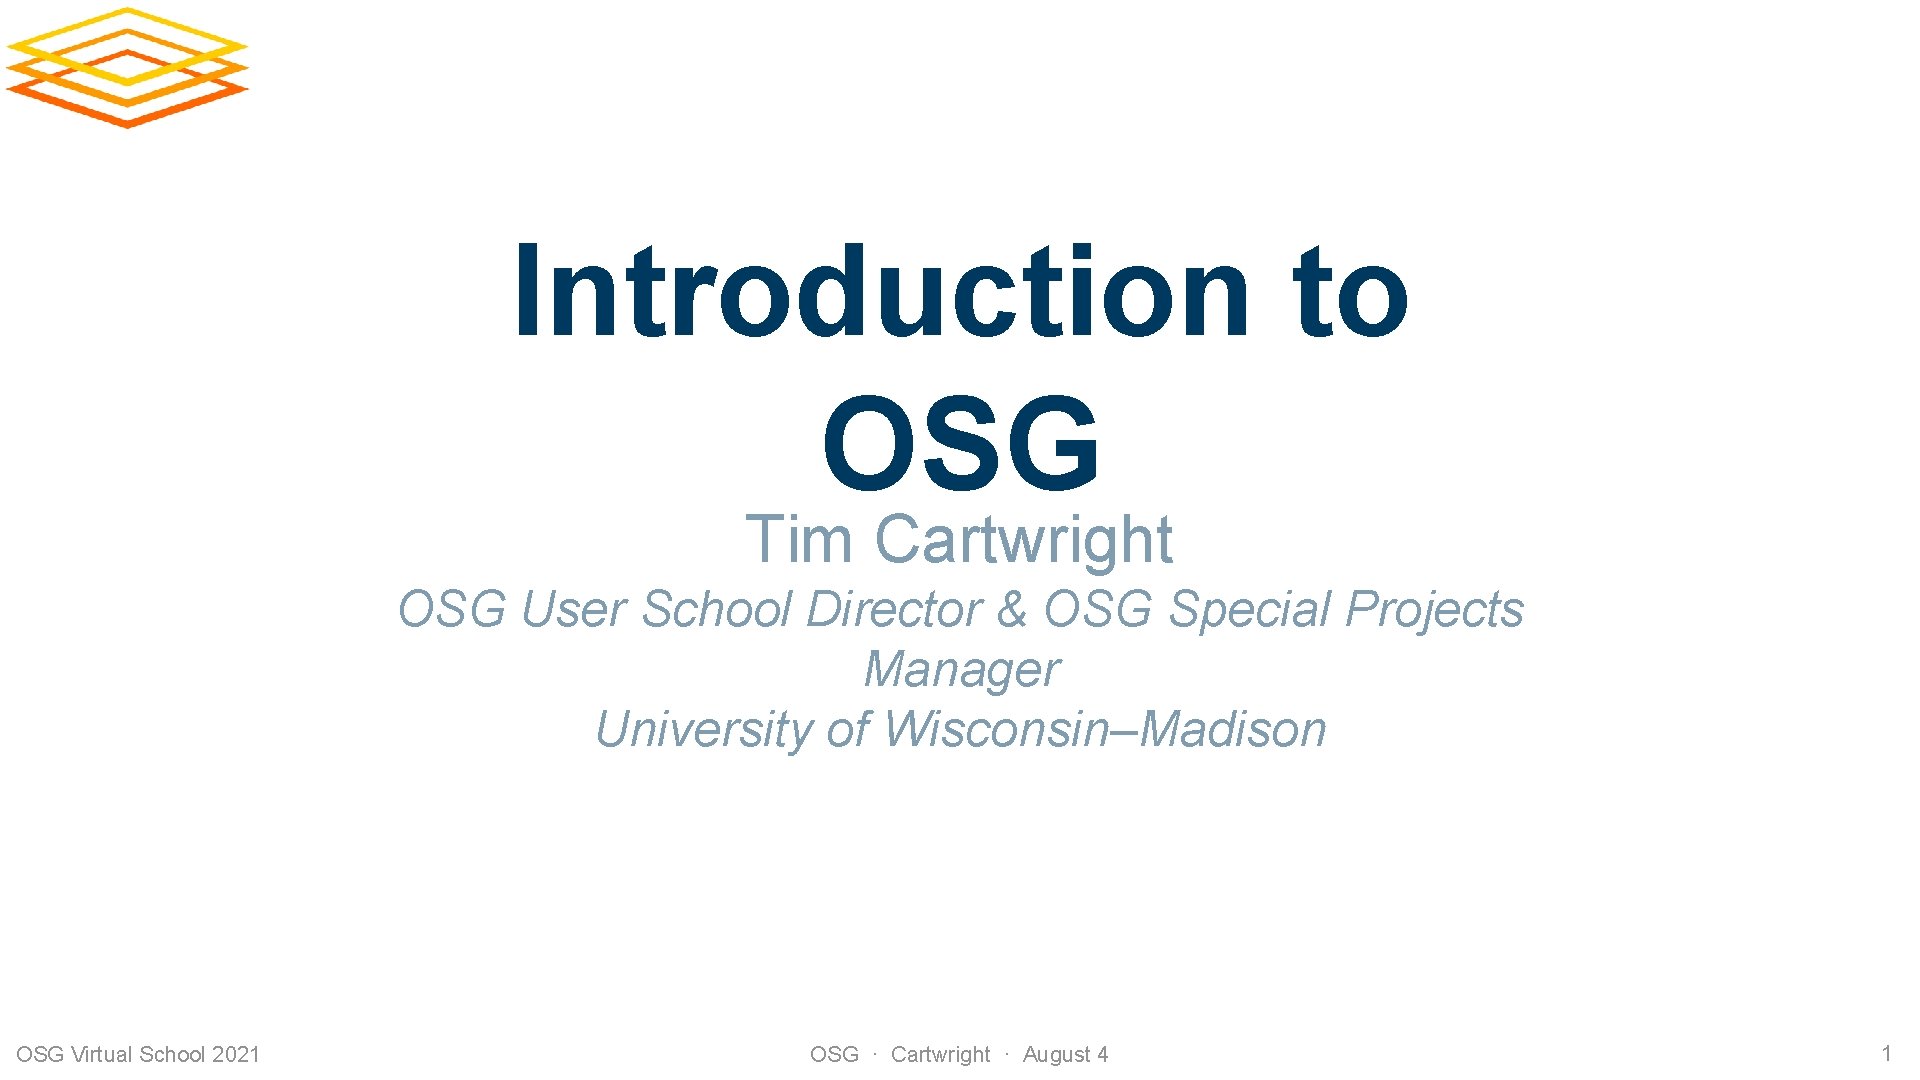 Introduction to OSG Tim Cartwright OSG User School Director & OSG Special Projects Manager